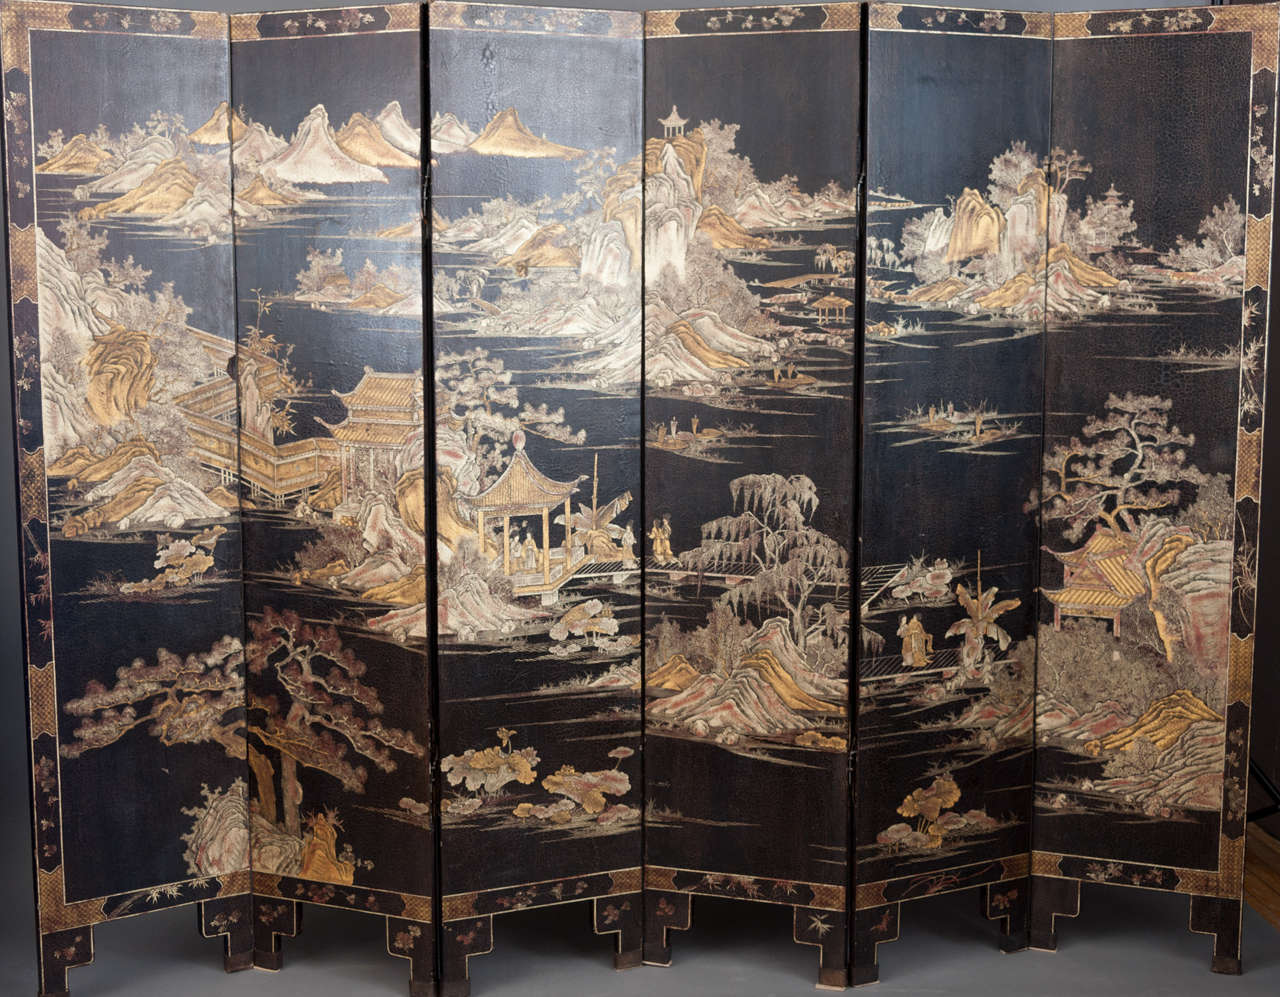 
A wonderful 19th century Chinese lacquer 
six fold screen depicting landscapes, figures and buildings.

Each panel measuring 16”, 40.5cm wide and 
72”, 184cm high. The whole 98.5” wide.